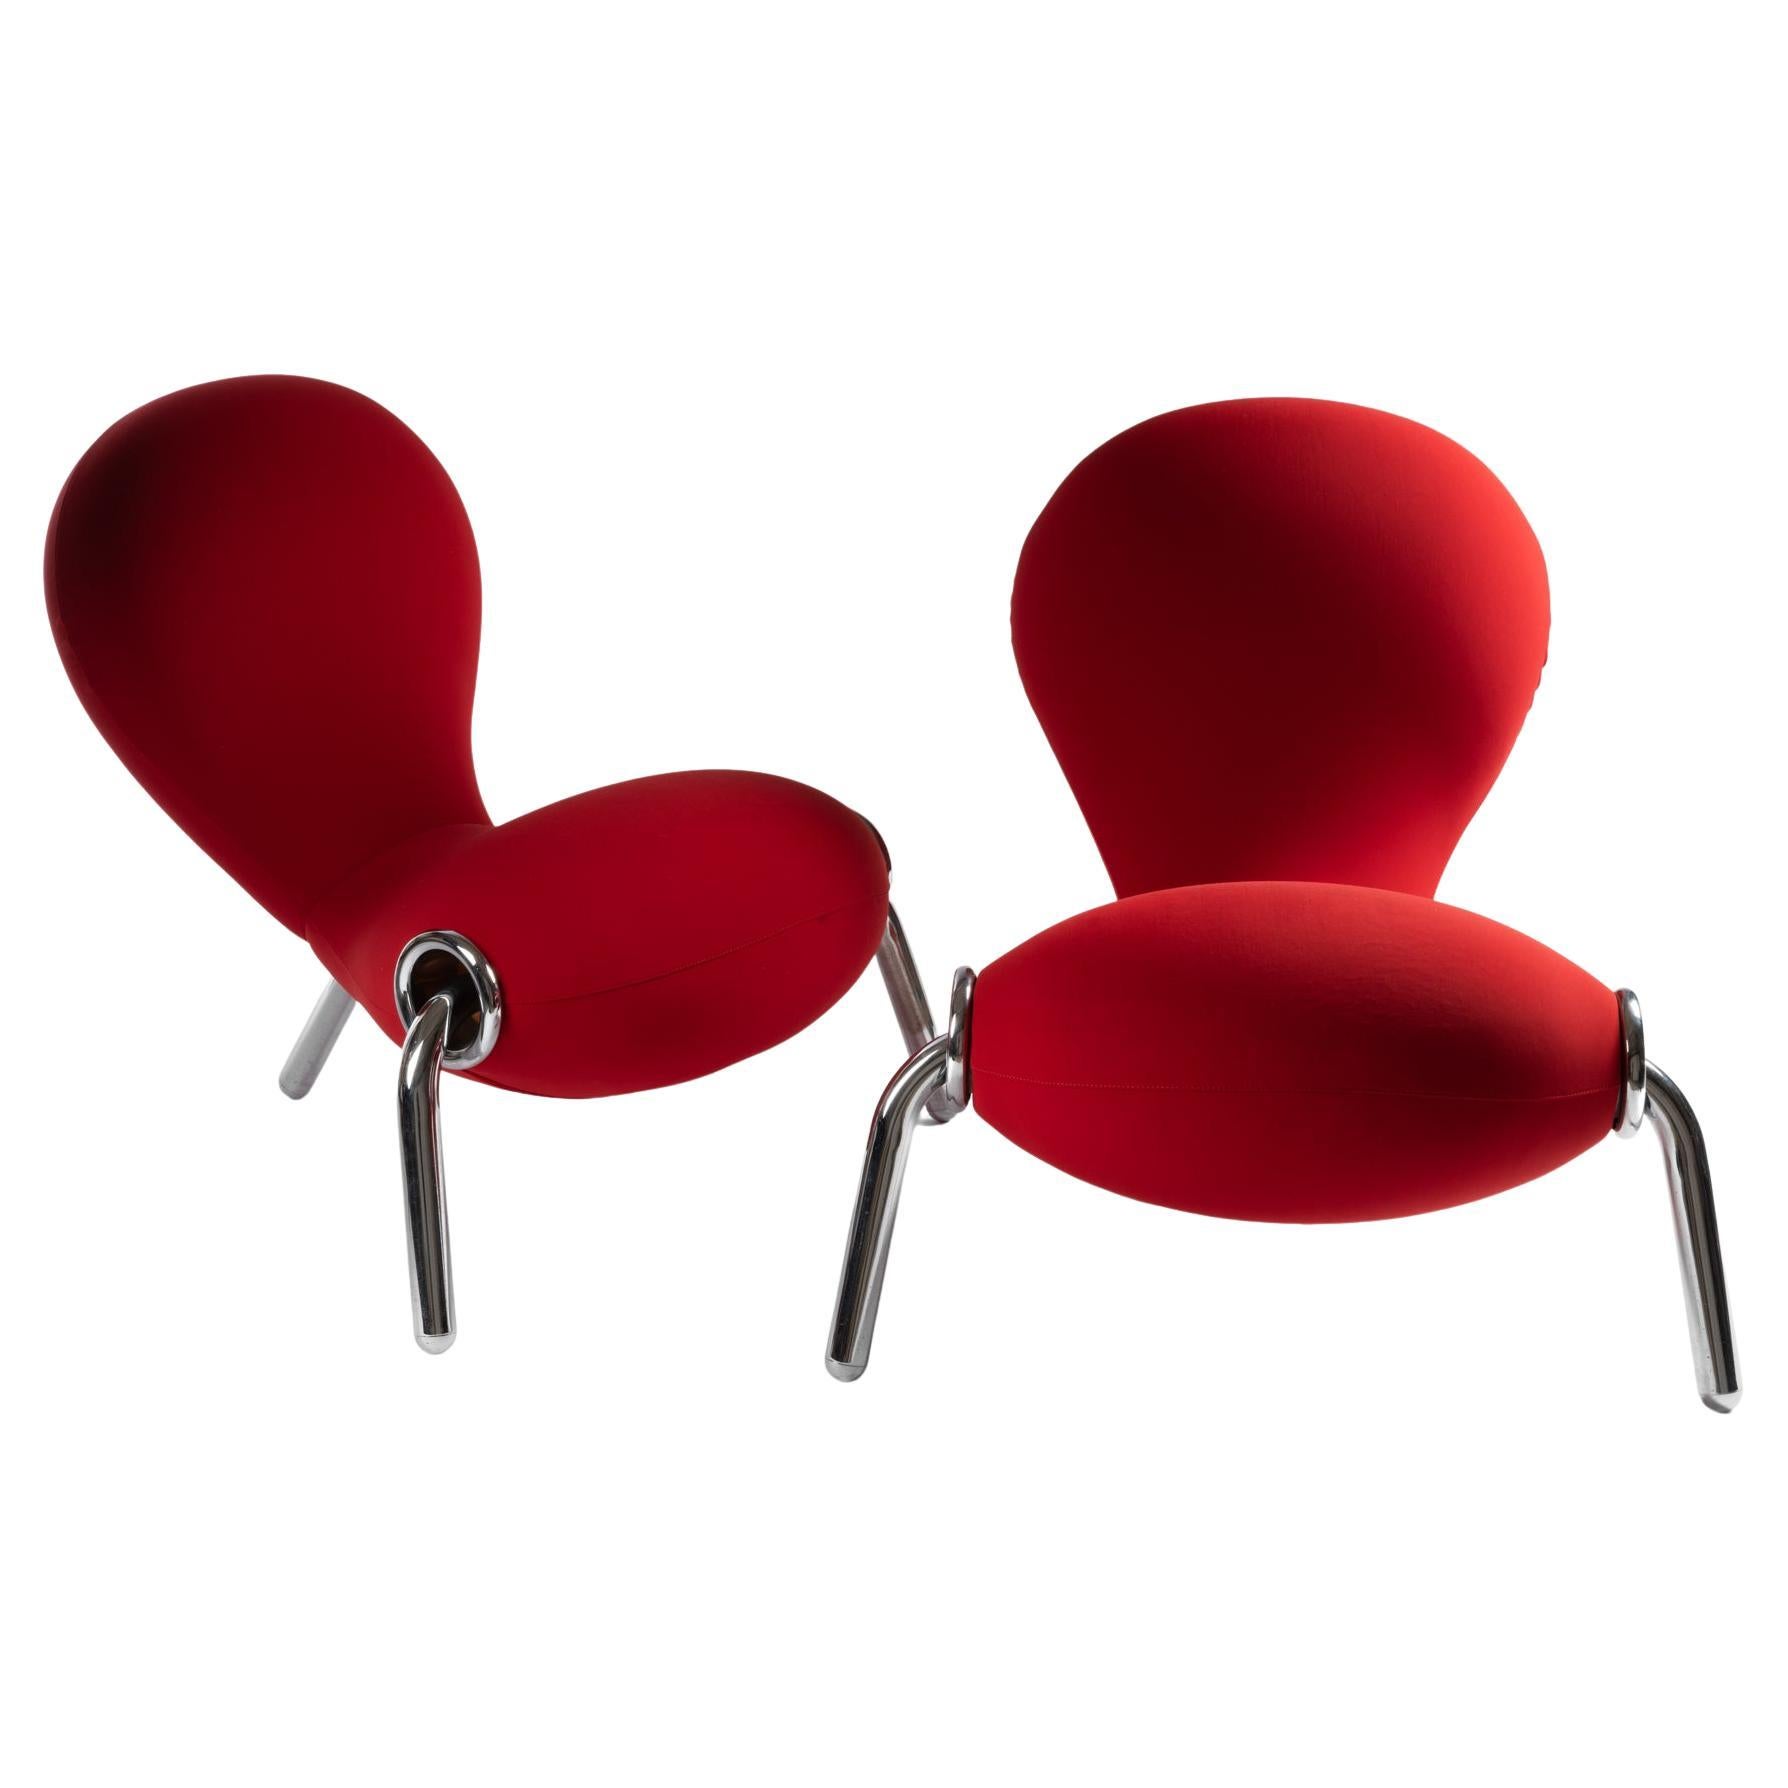 Pair of Embryo Chairs by Marc Newson for Cappelini